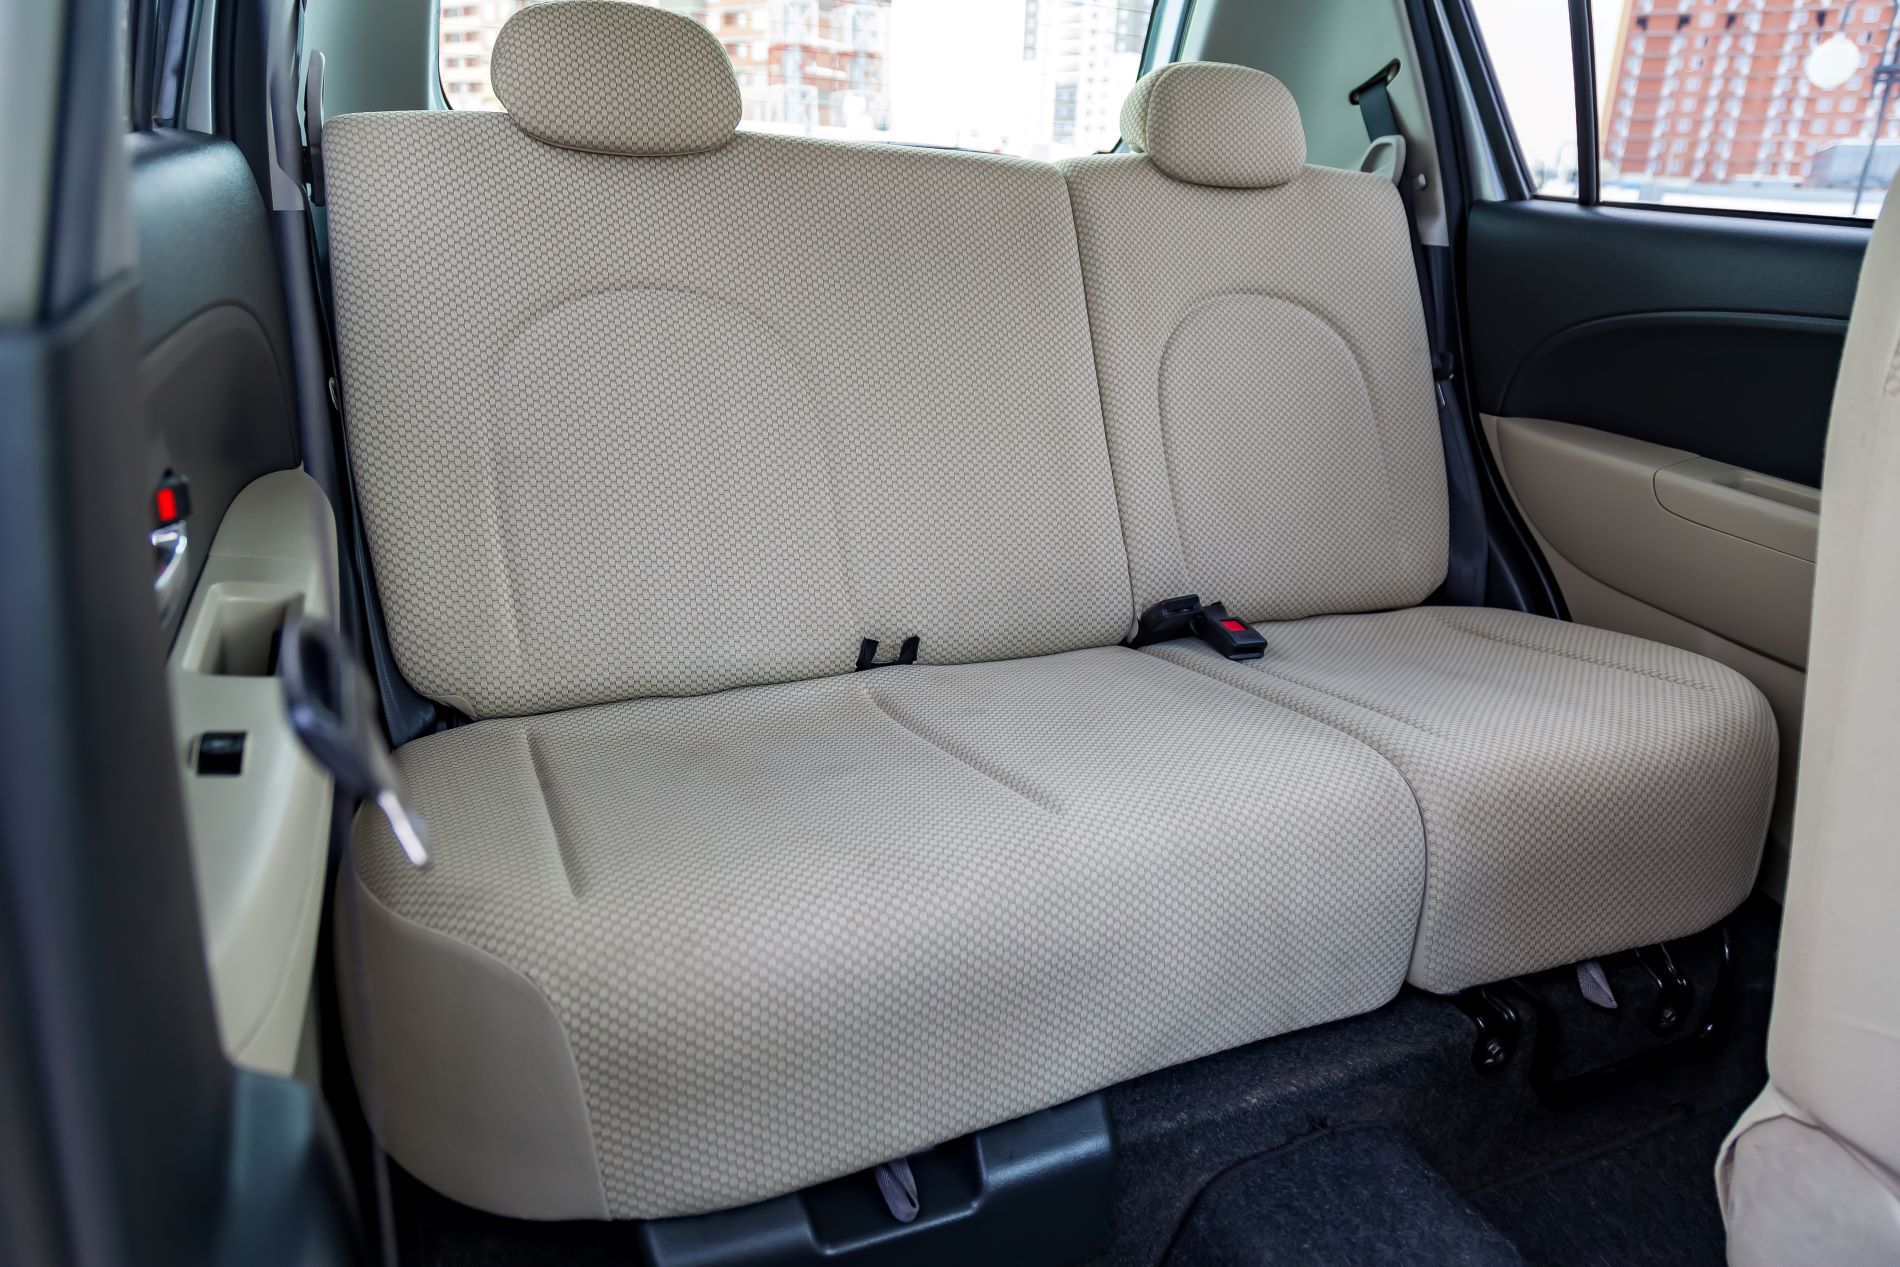 How To Clean And Maintain Fabric Car Seats